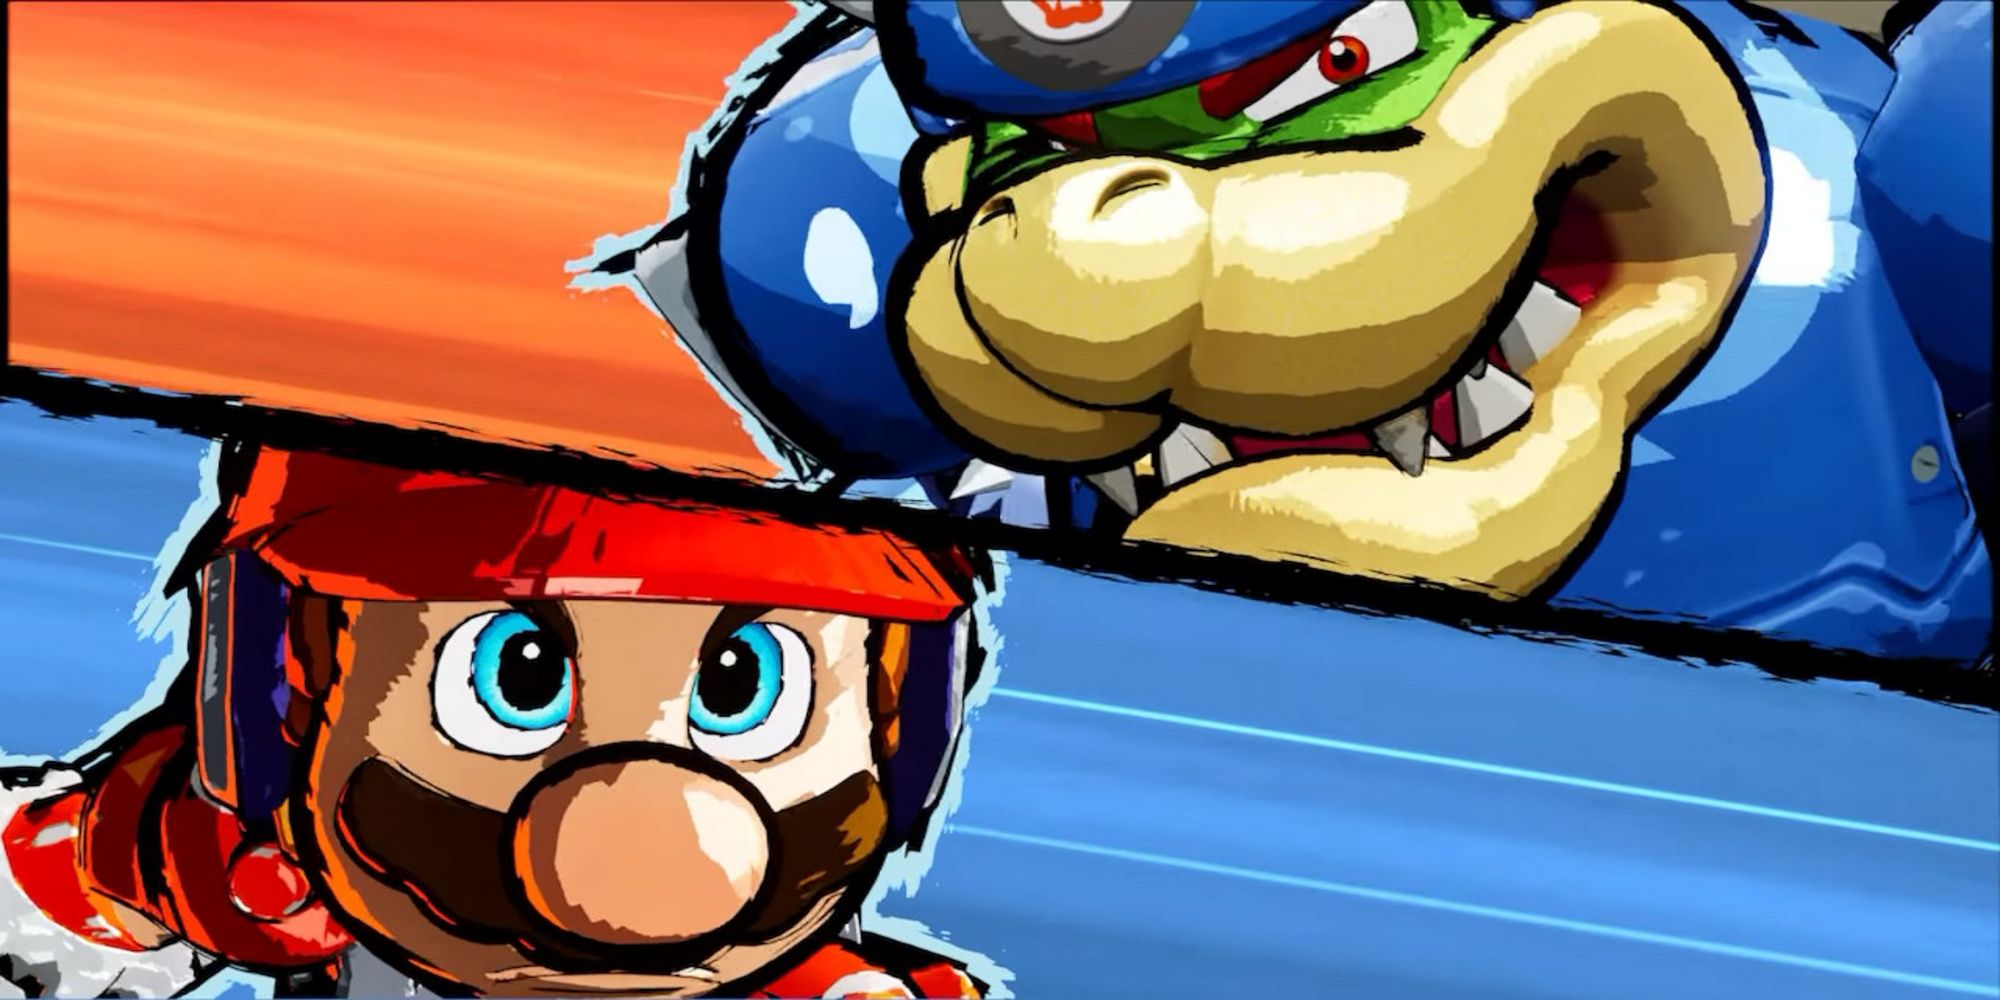 Split image of Mario and Bowser from Mario Strikers: Battle League